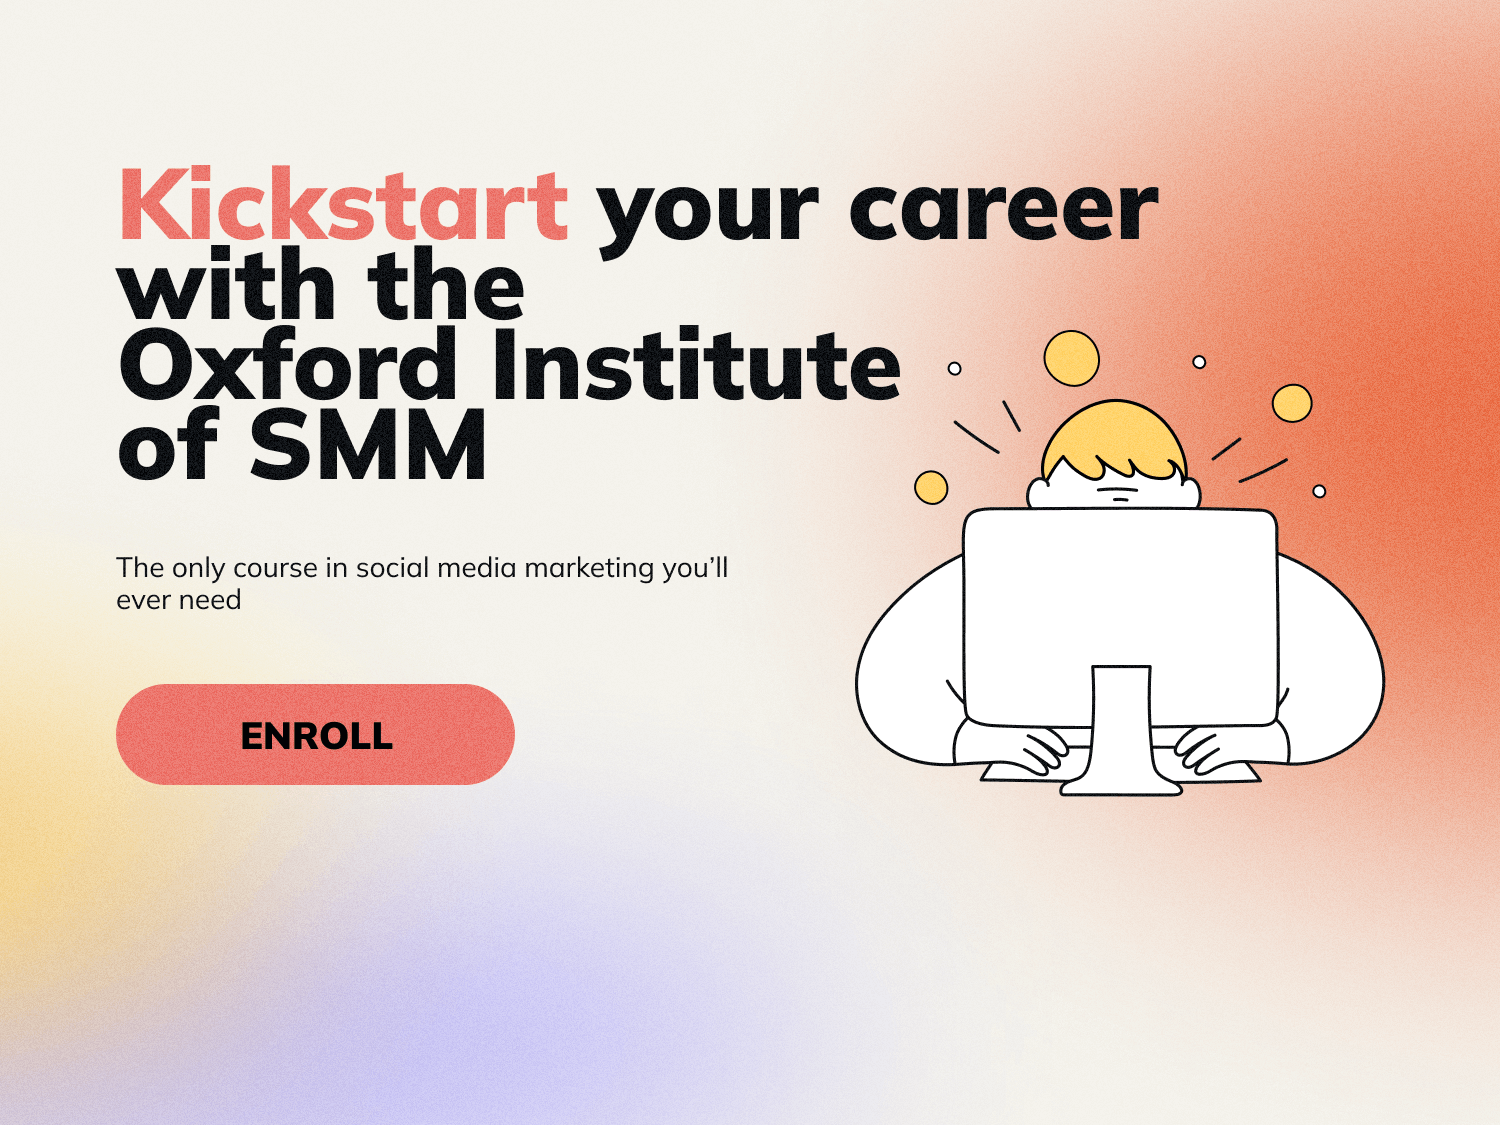 The landing page header for an online course that says “Kickstart your career with the Oxford Institute of SMM. The only course in social media marketing you’ll ever need”